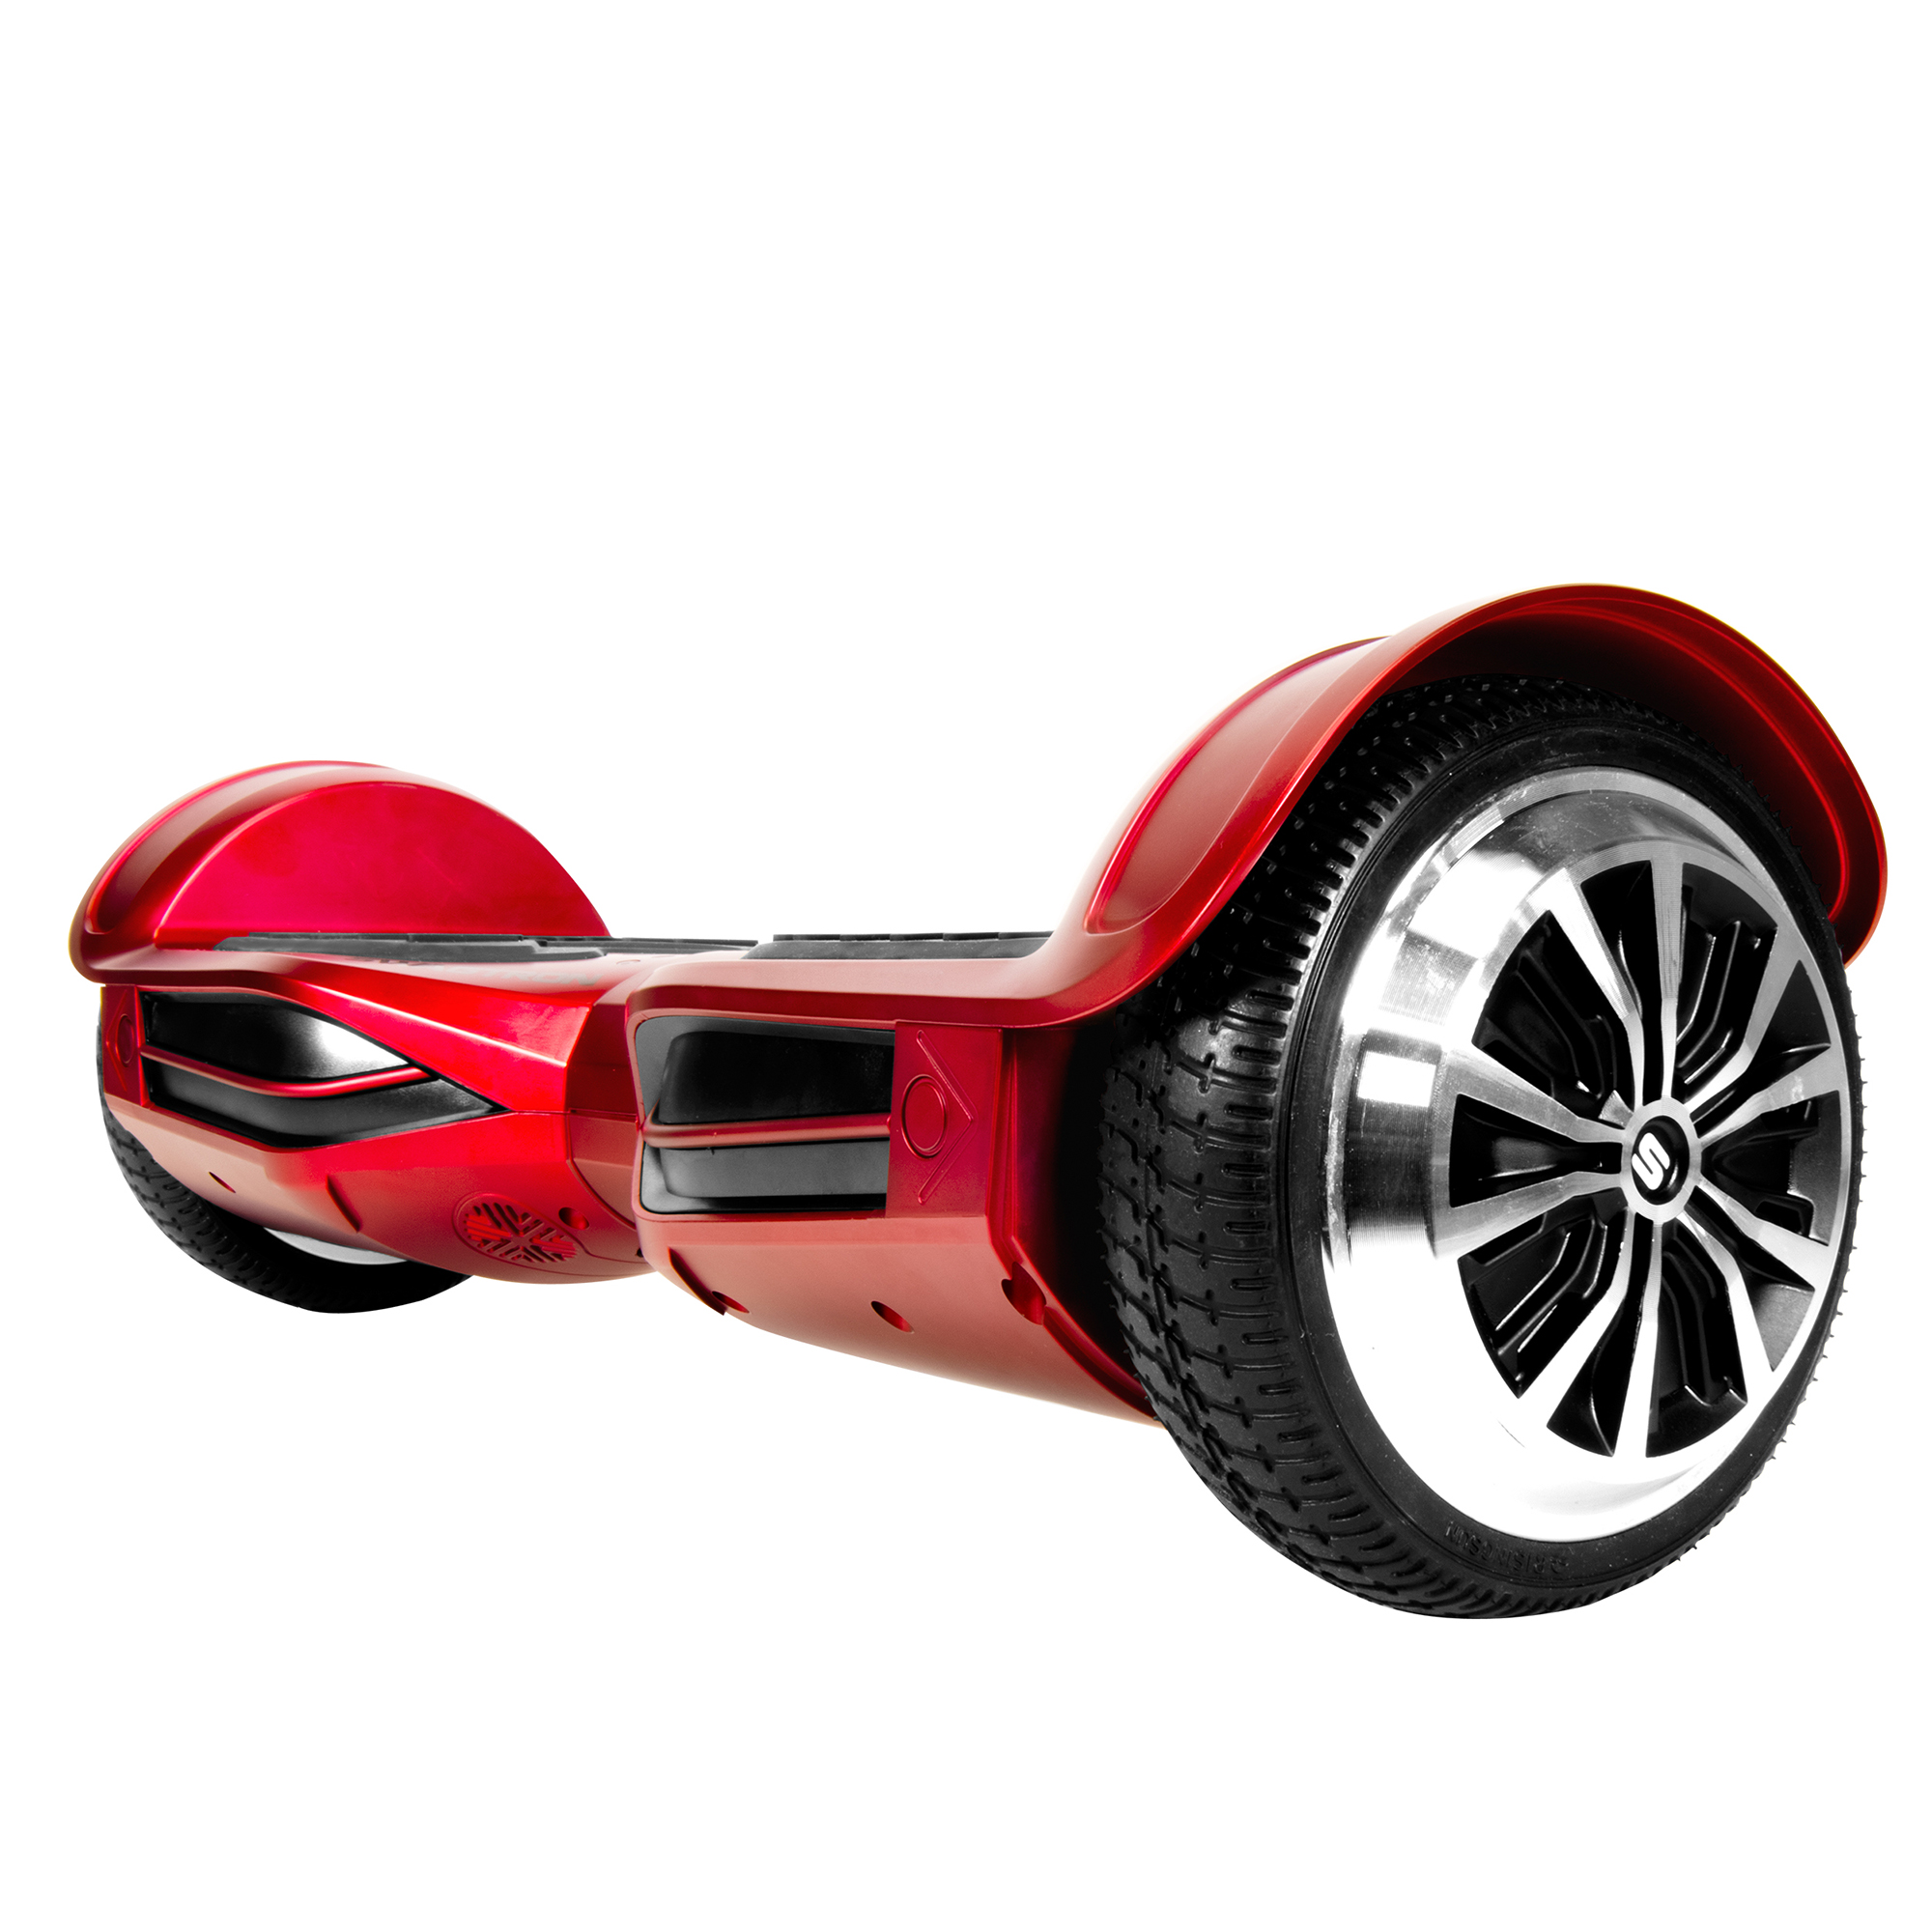 Swagtron Swagboard T380 Elite Hoverboard